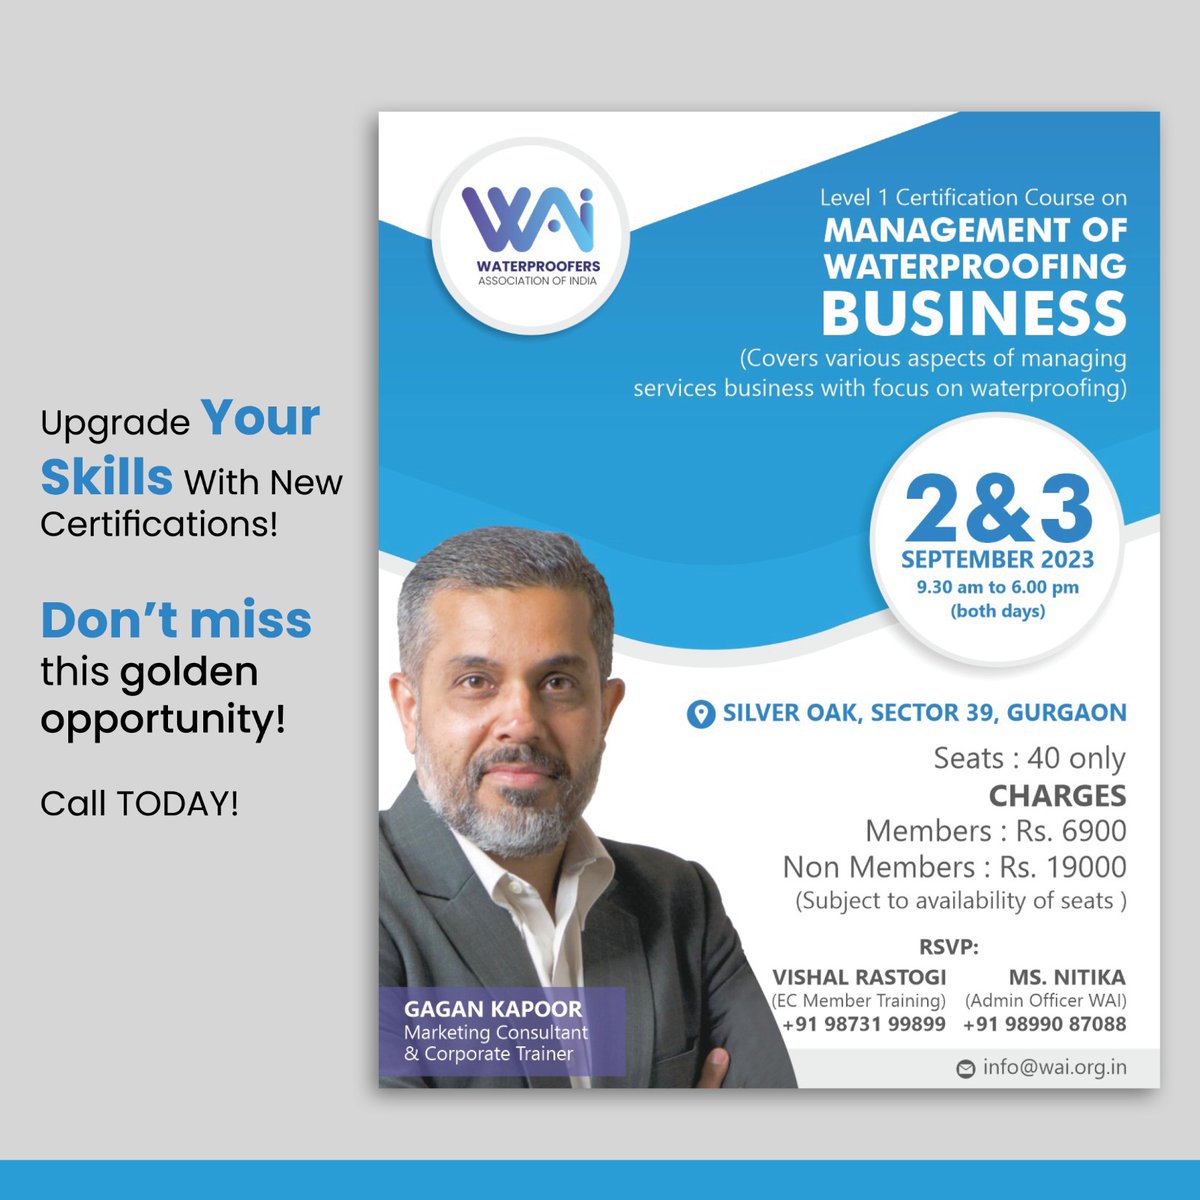 Enrol for the two-day Level 1 Certification Course on the Management of Waterproofing Business offered by WAI.

Hurry! Limited Seats!

#WAI #Waterproofing #Business #level1 #Certification #waterproofingsolutions #building